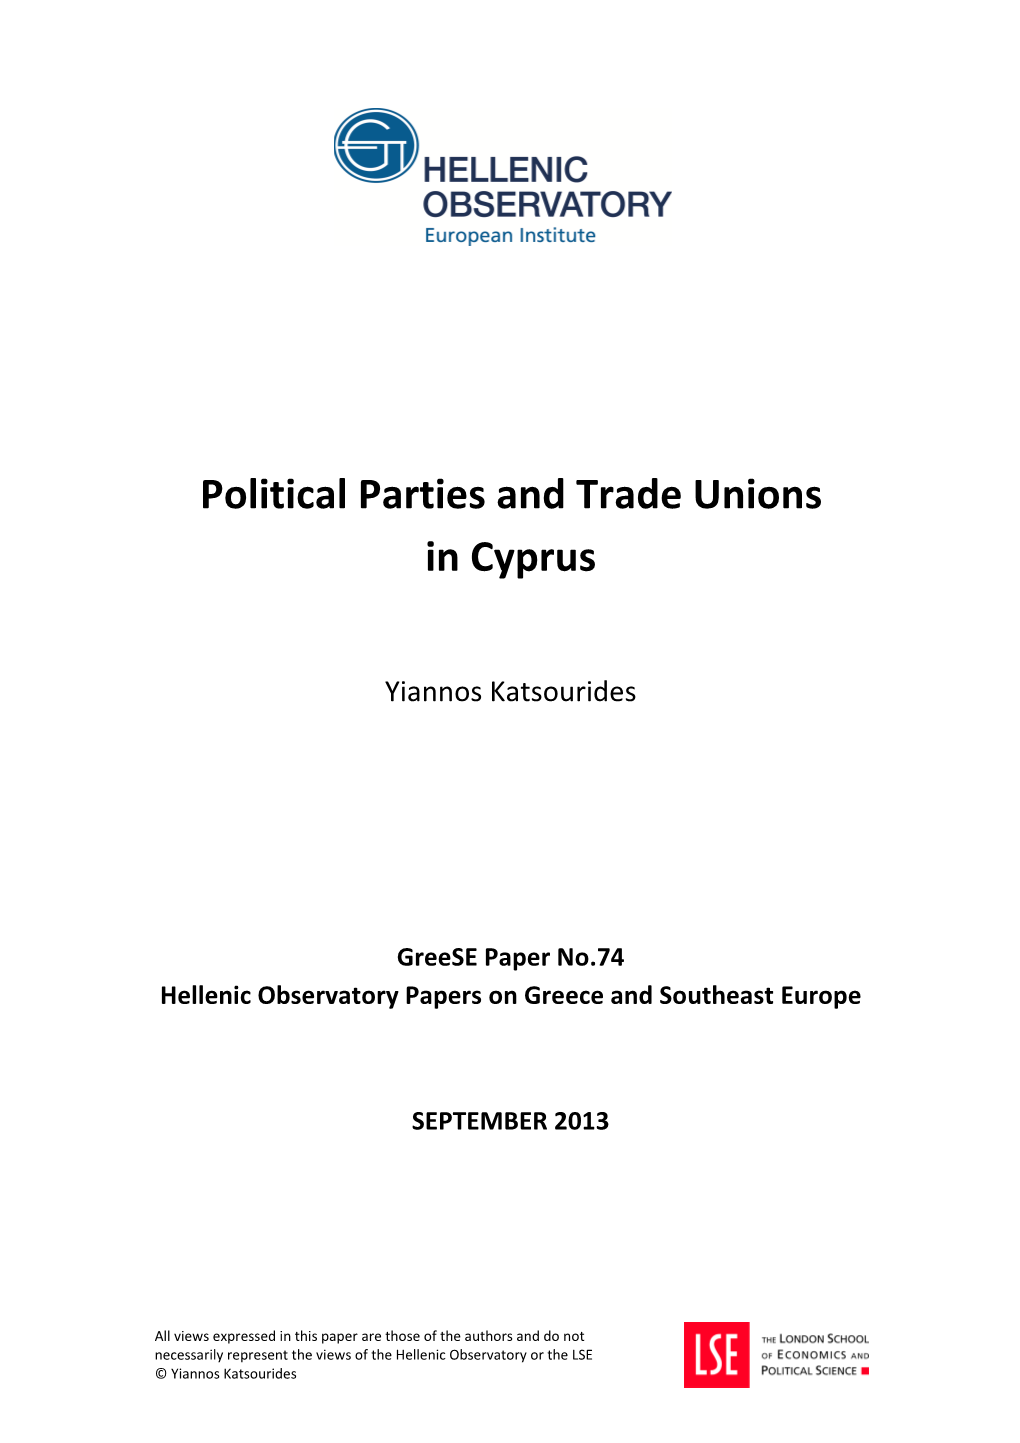 Political Parties and Trade Unions in Cyprus